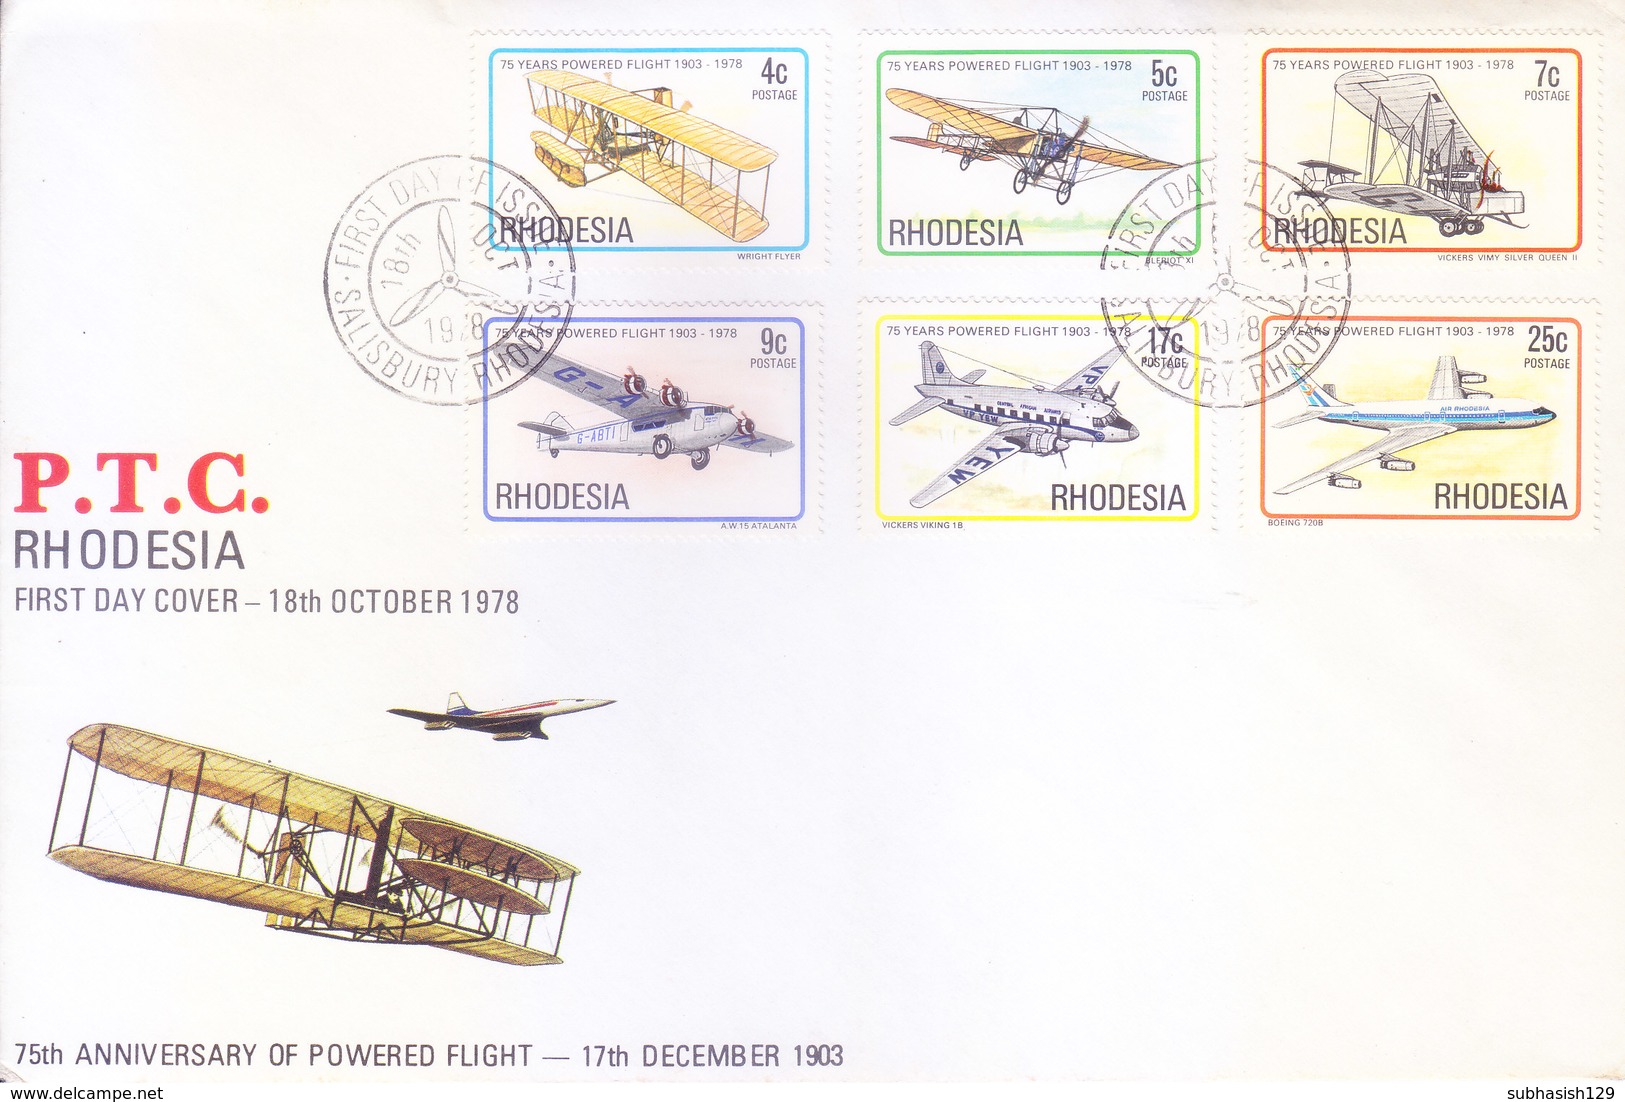 RHODESIA / ZINBABWE : FIRST DAY COVER : 75TH ANNIVERSARY OF POWERED FLIGHT : 17-12-1903 : COMPLETE SET OF 6v. - Zambesia